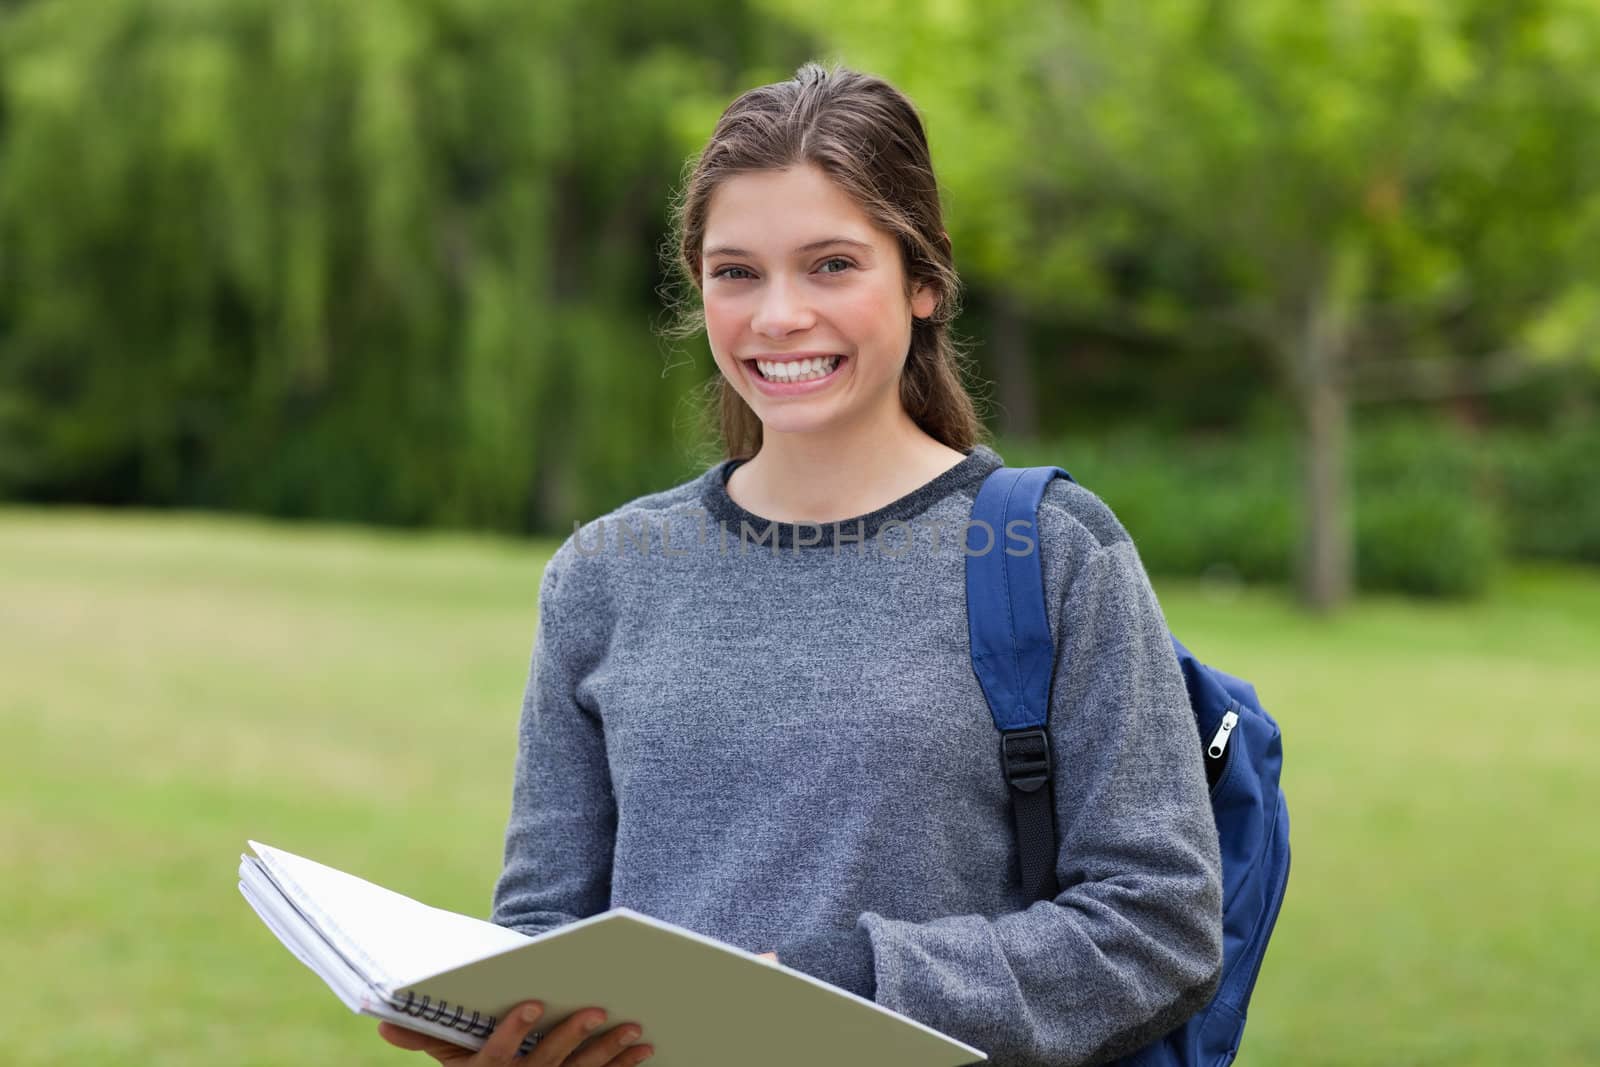 Young girl standing in a park while holding her notebook and beaming